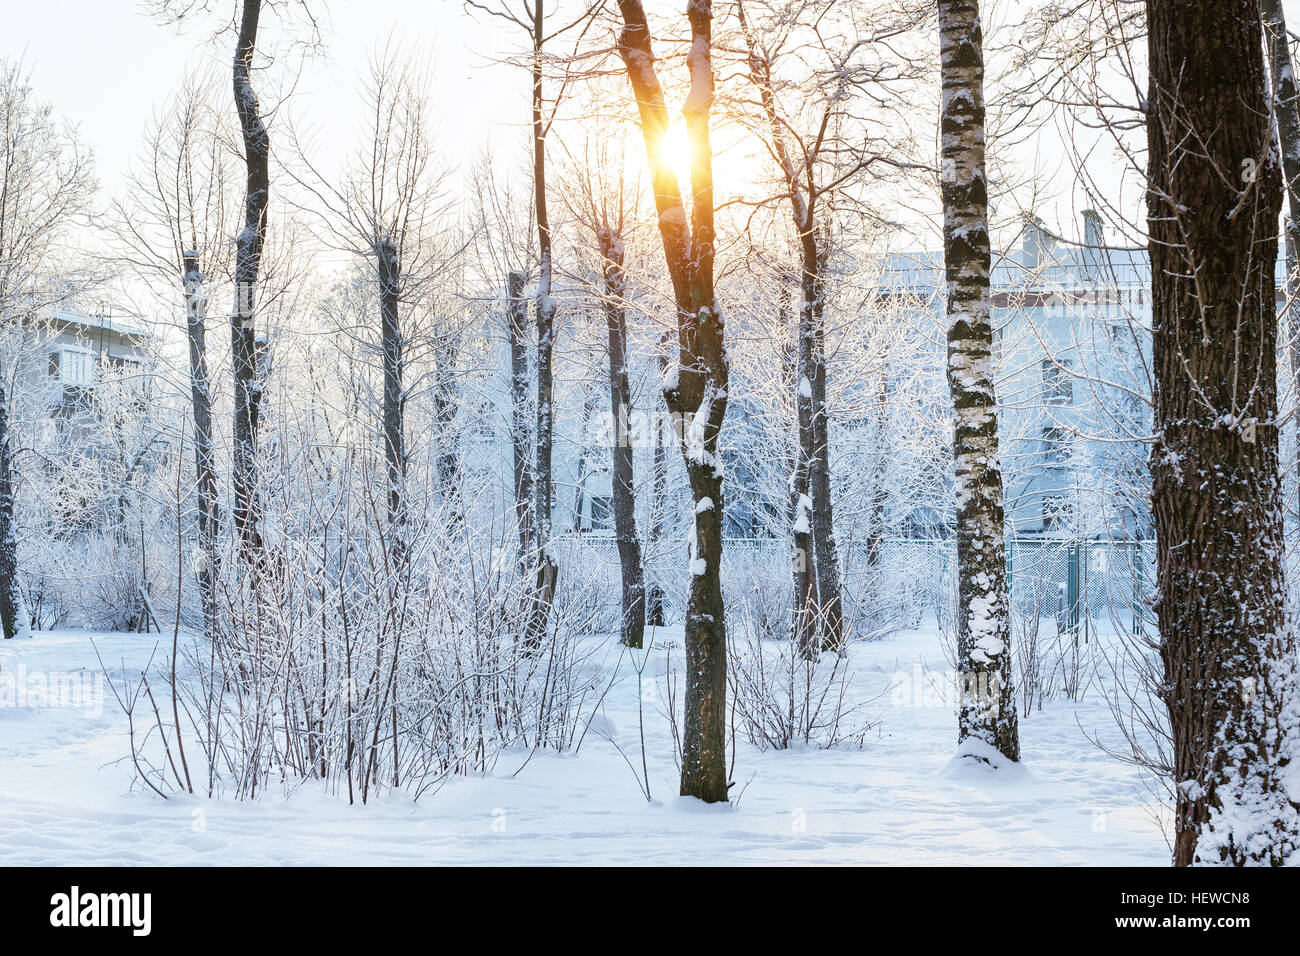 Winter Sunny day in snow Park. Falling snowflakes glare in direct sunlight, streaming through snow covered trees. Consequences of snowfall in urban en Stock Photo